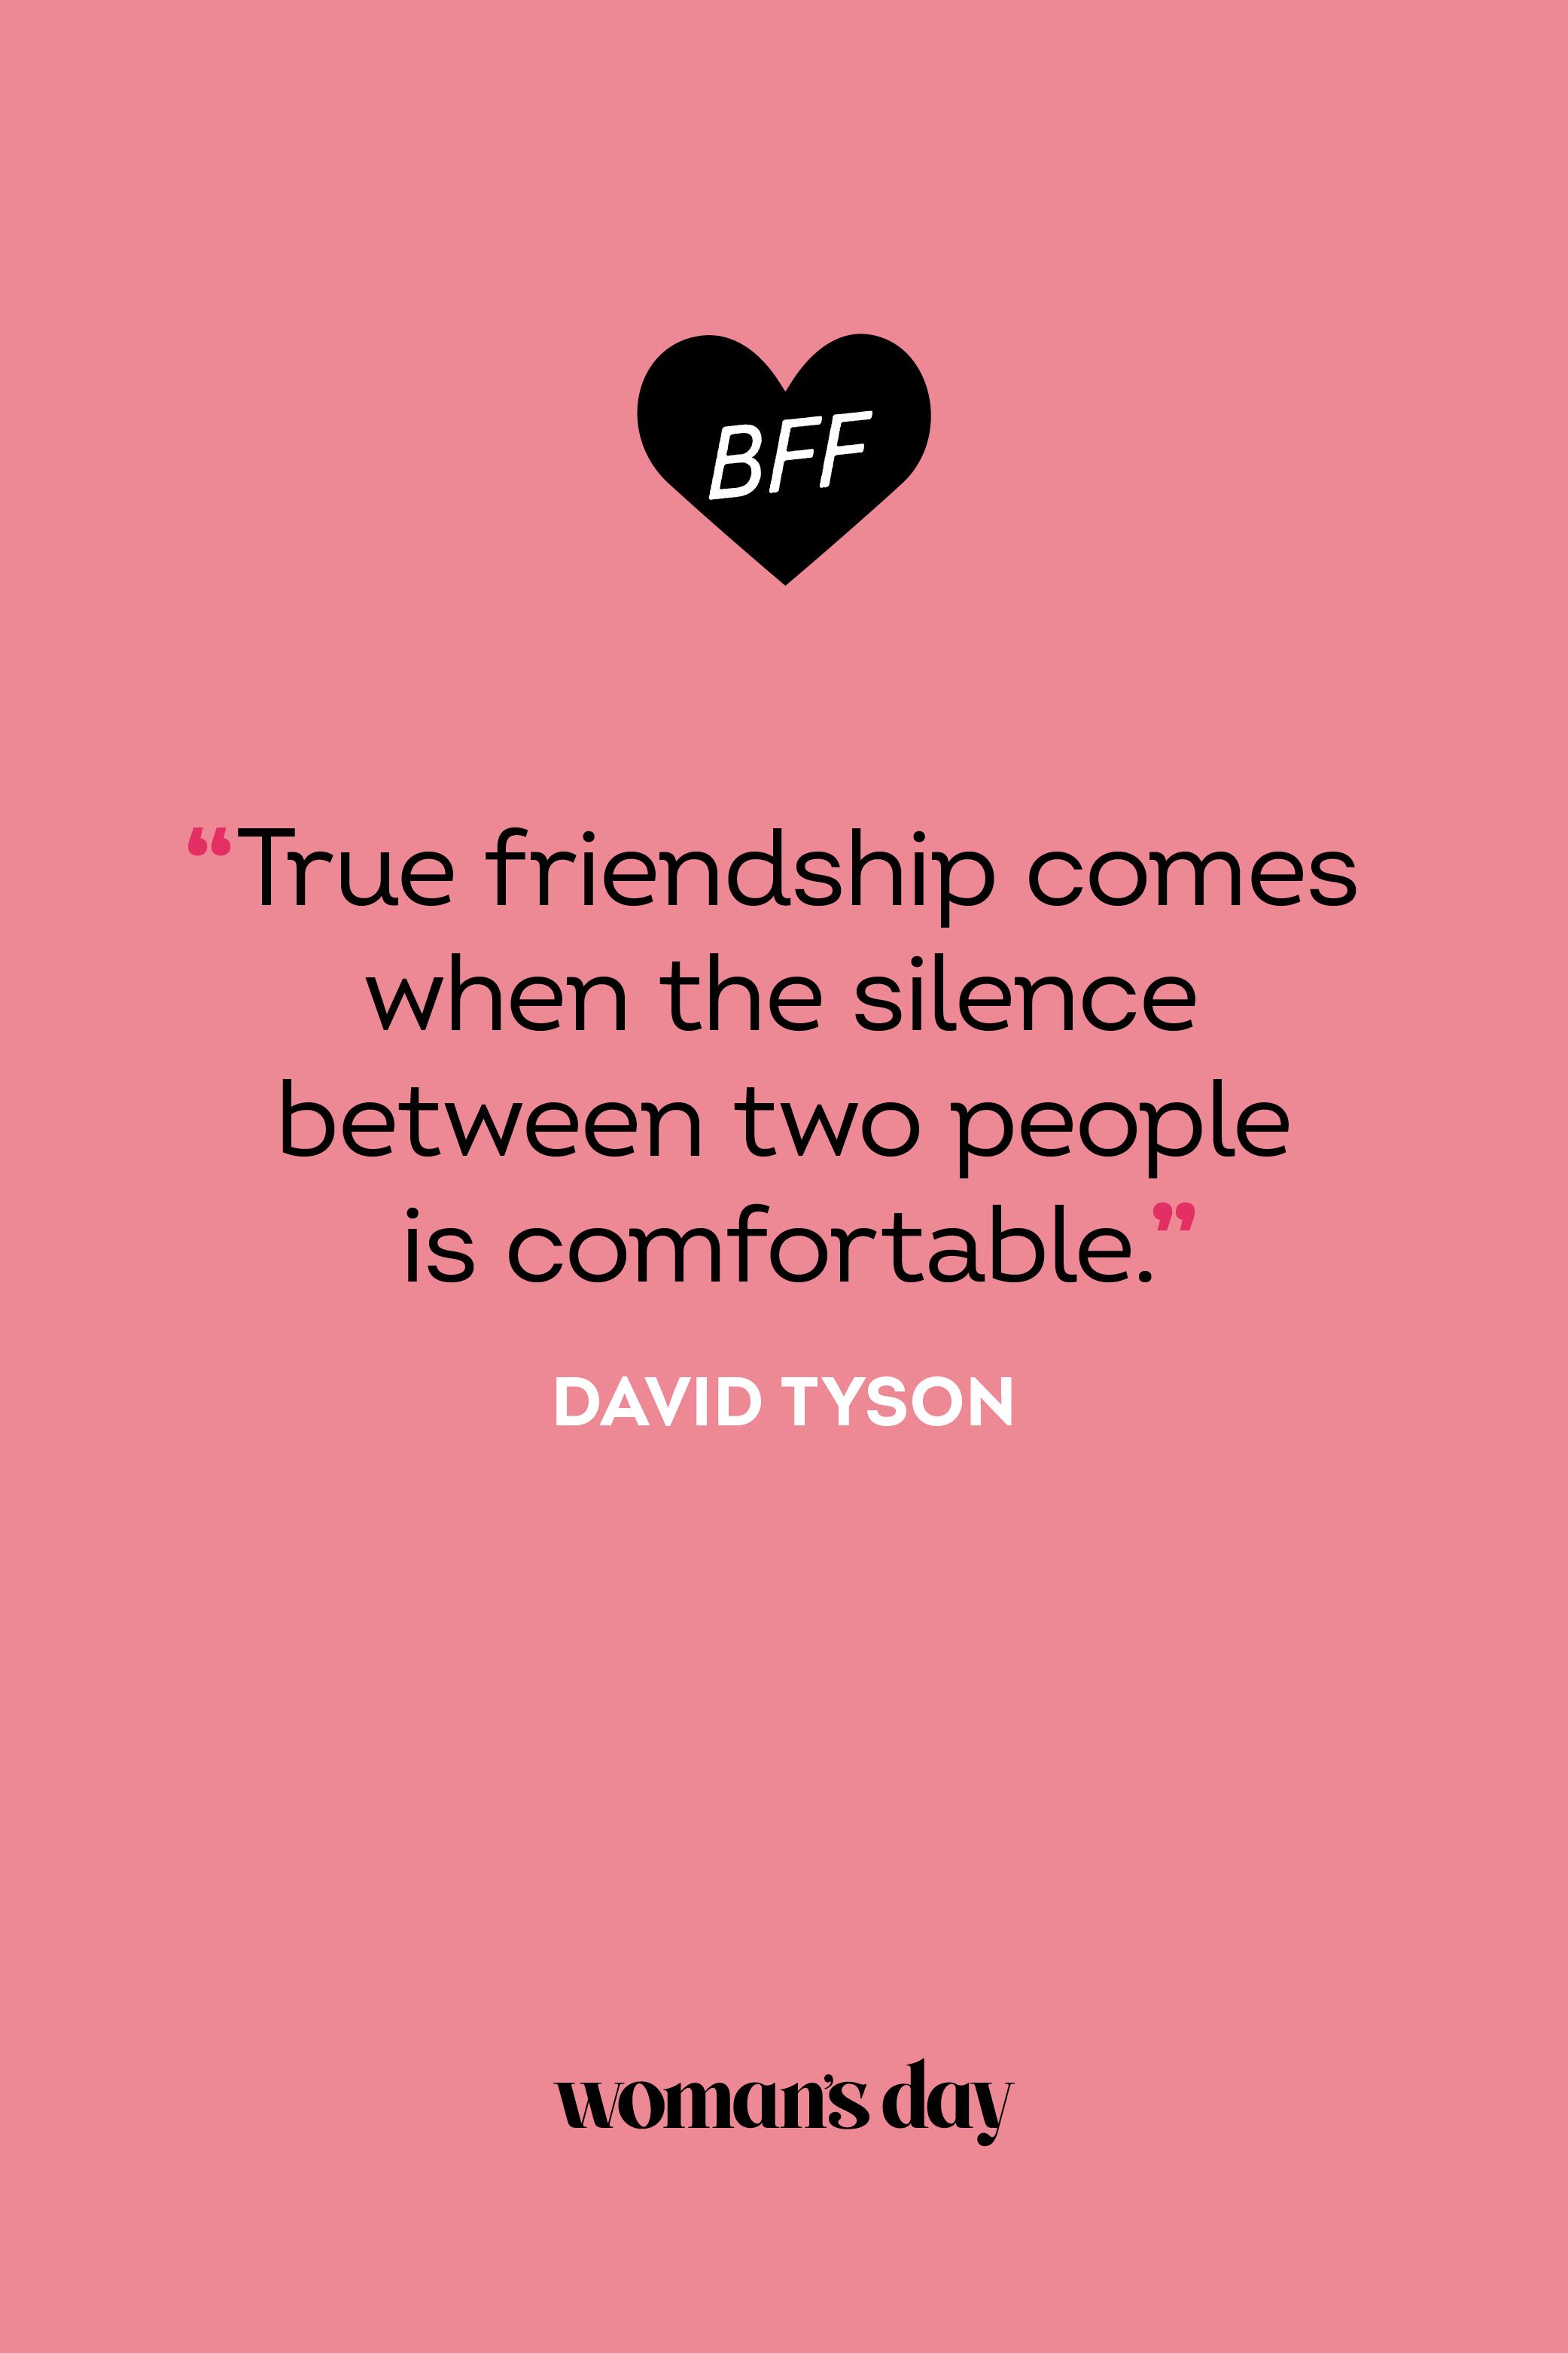 quotes about my best friend girl